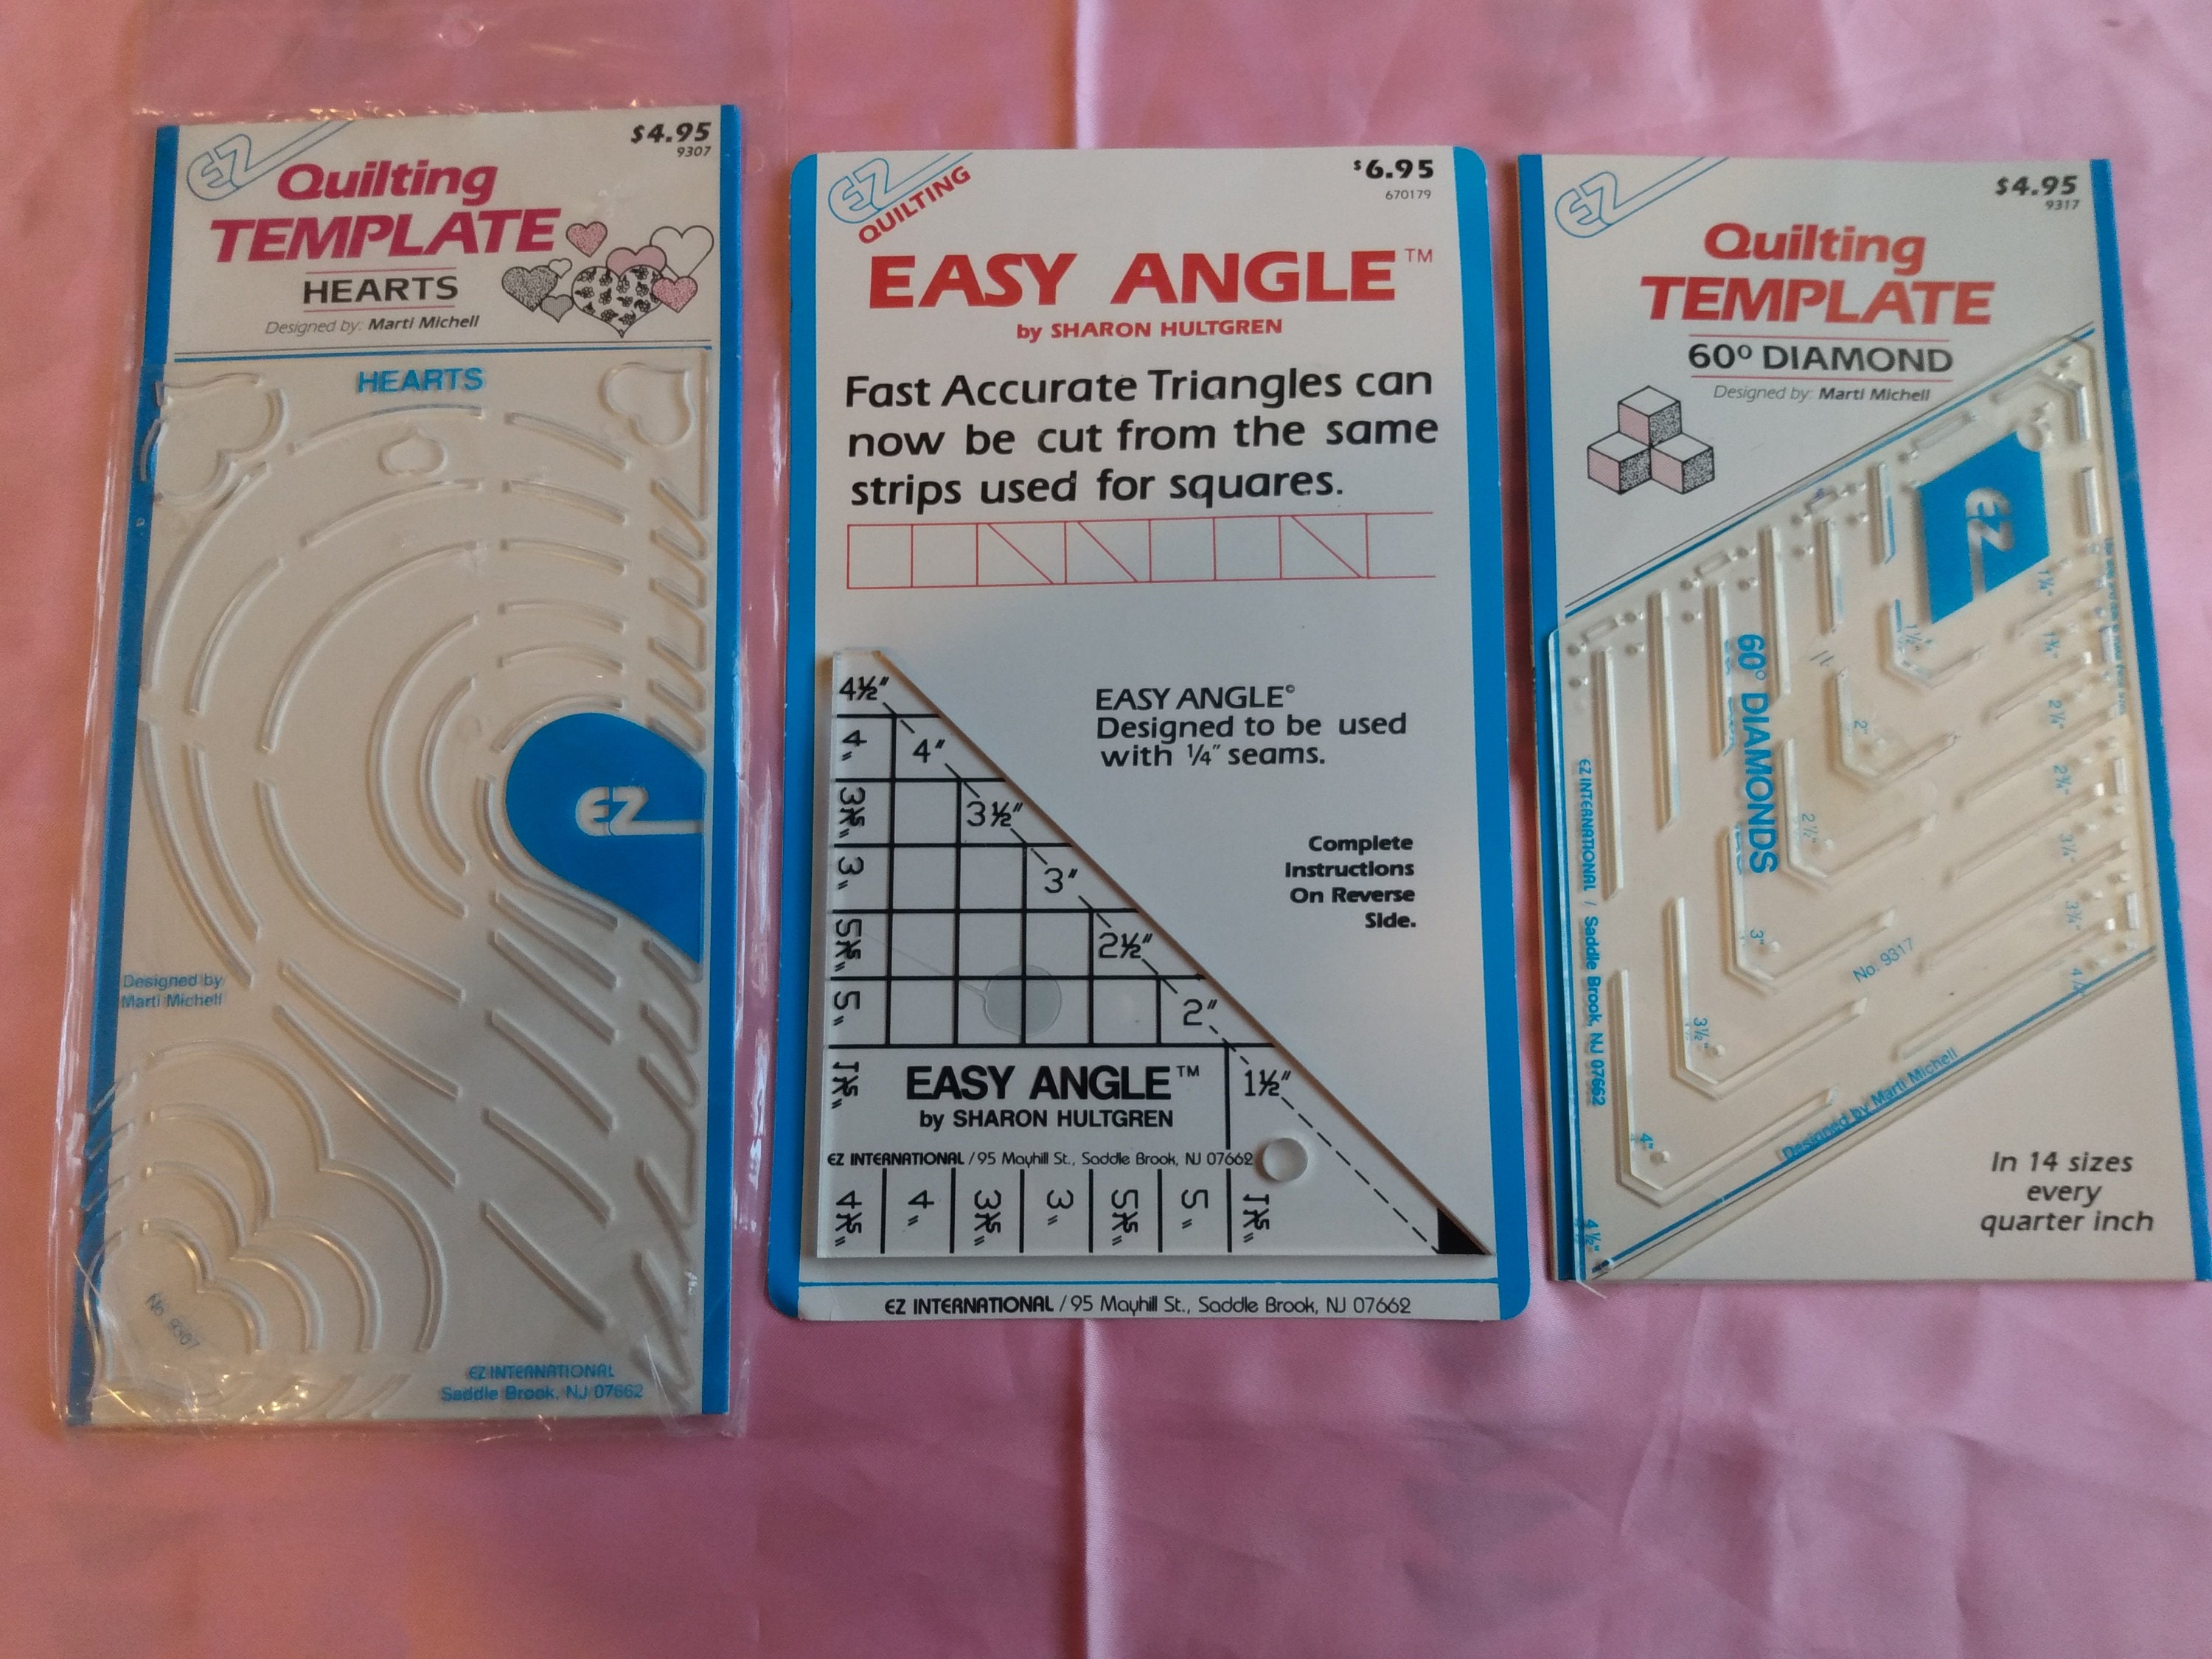 Arc, Half Circle Quilting Ruler, 6 and 4 Set, Longarm or Sit Down Quilting,  Made in the USA, Available for High or Low Shank Machines. 